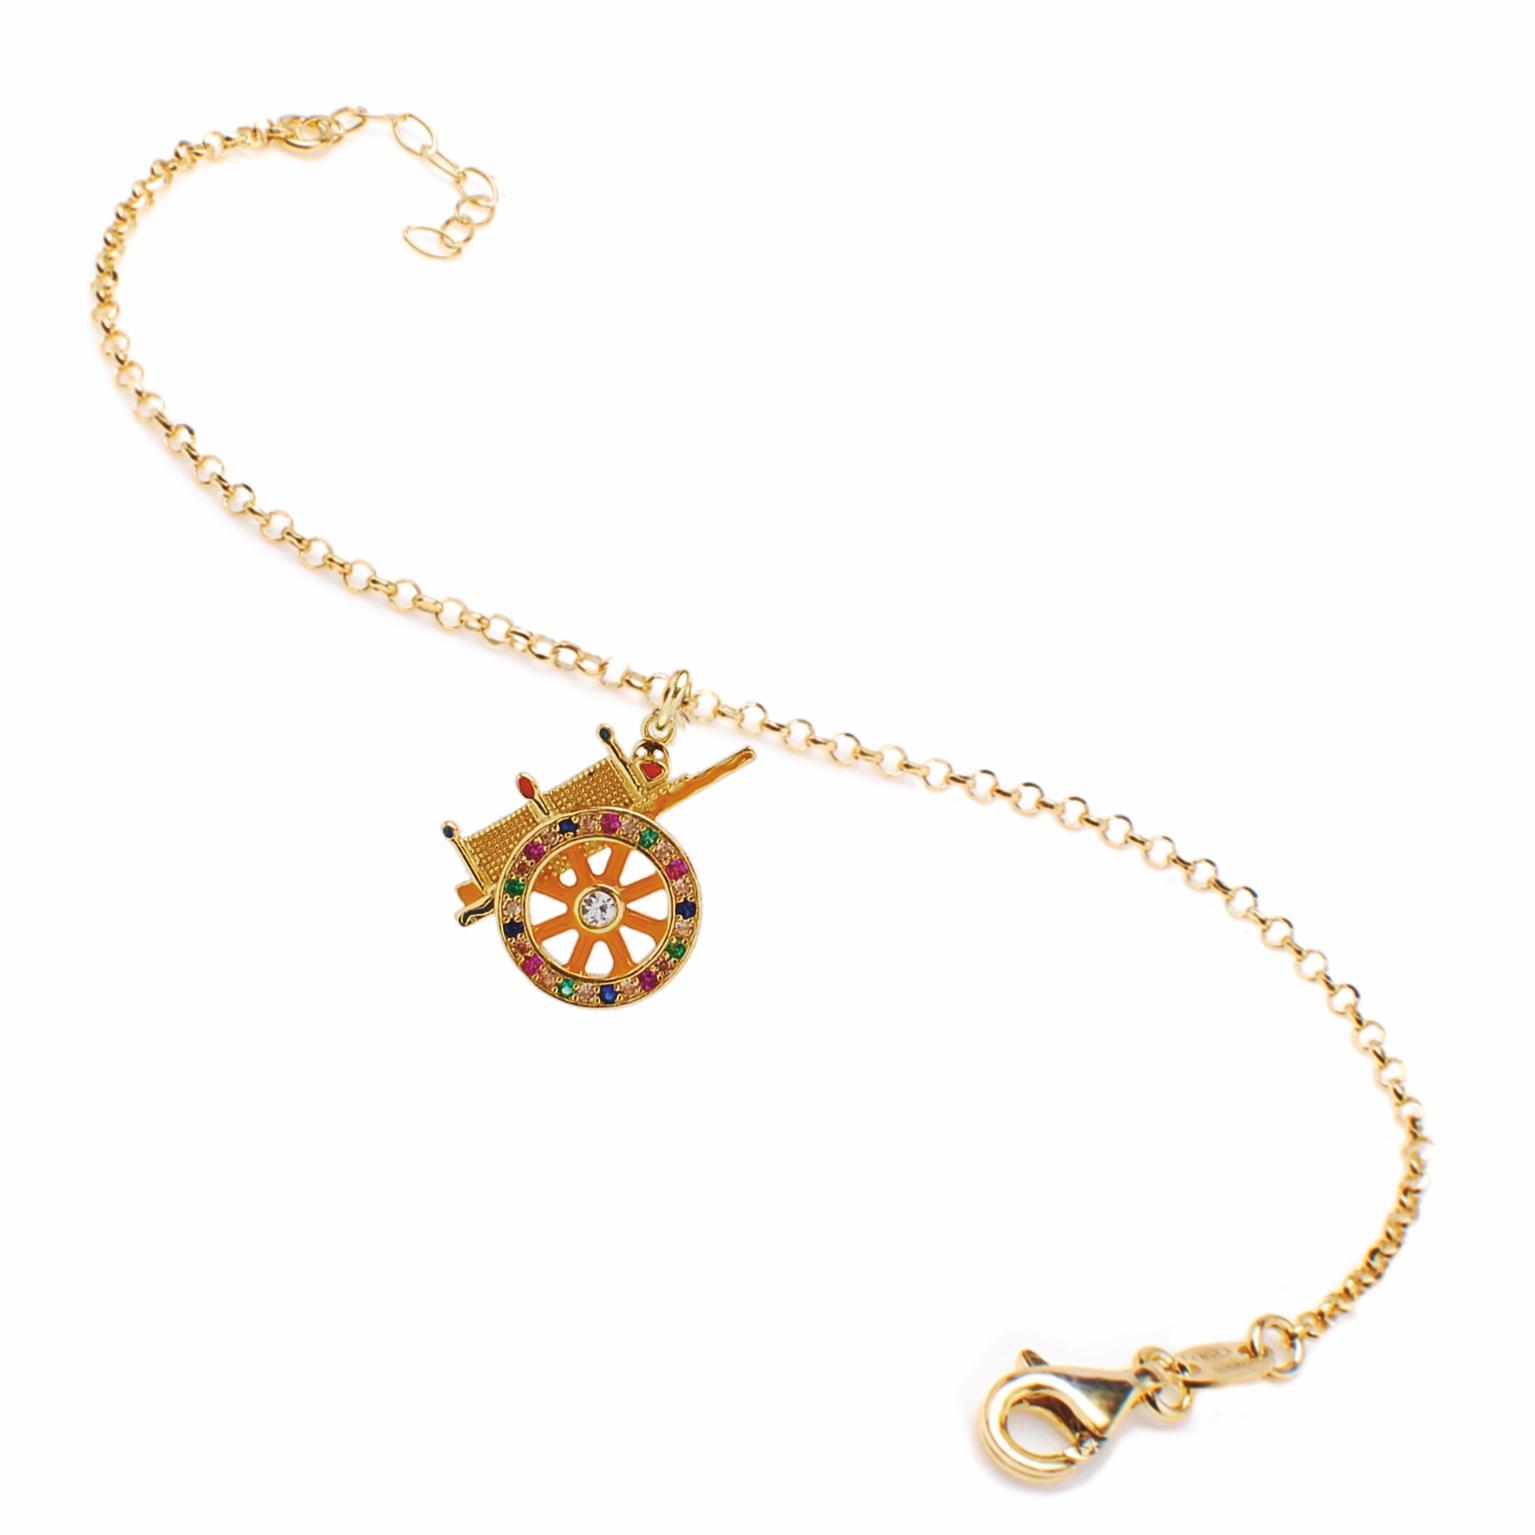 Golden silver bracelet with Sicilian cart symbol pendant with enamel and colored zircons - MY SICILY